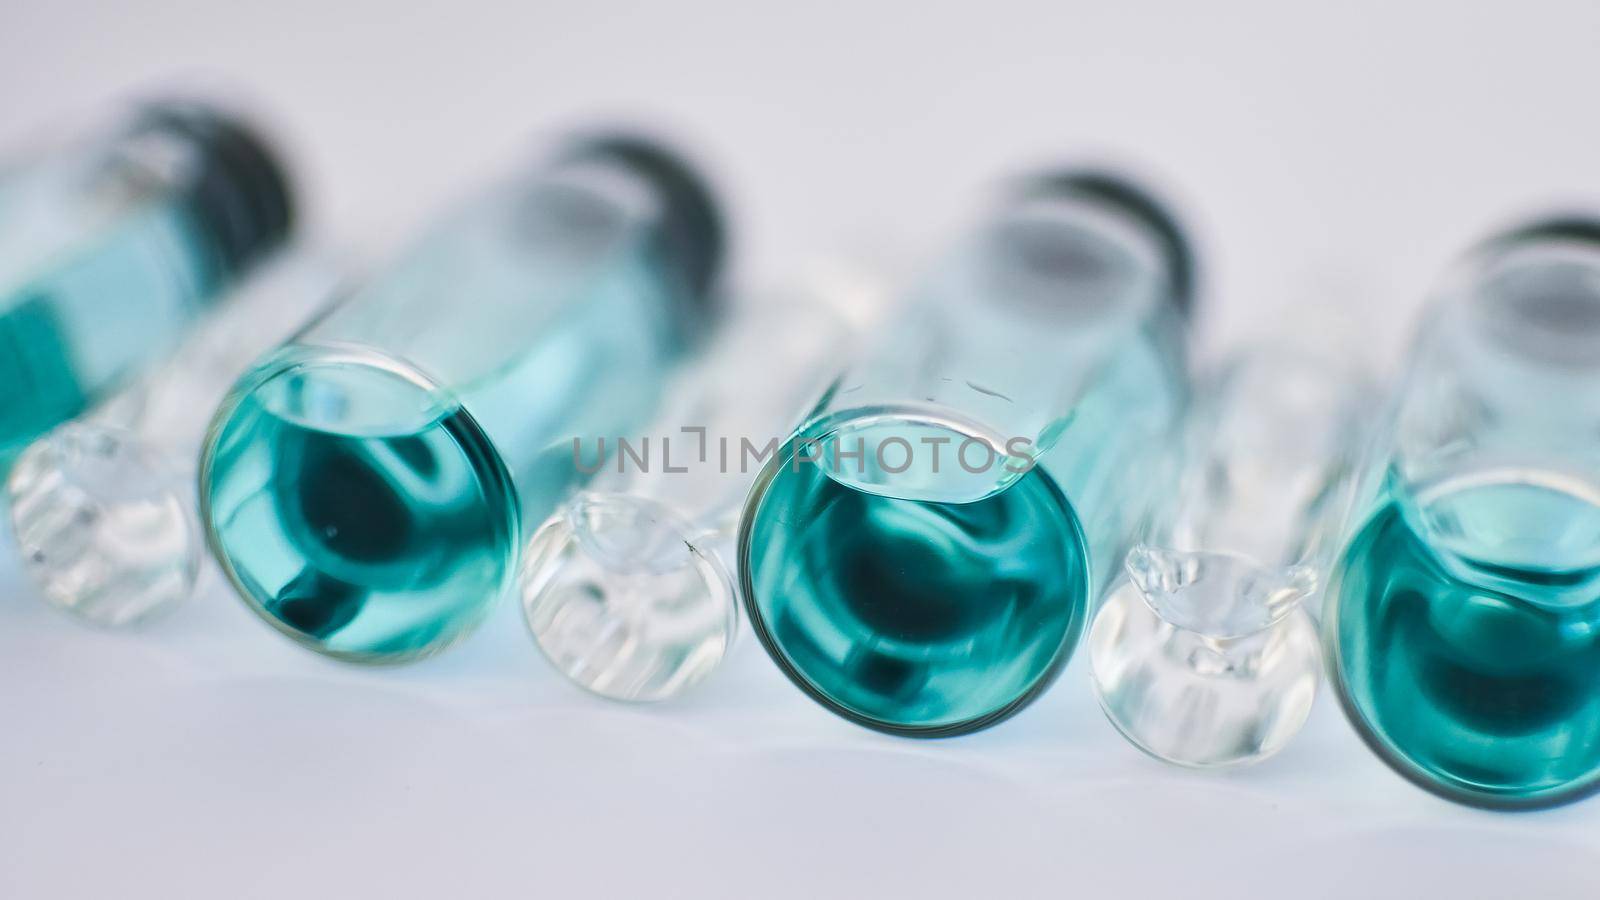 Medical ampoules for injection isolated on white background. Medicines and disease treatment, pharmacology and science concepts